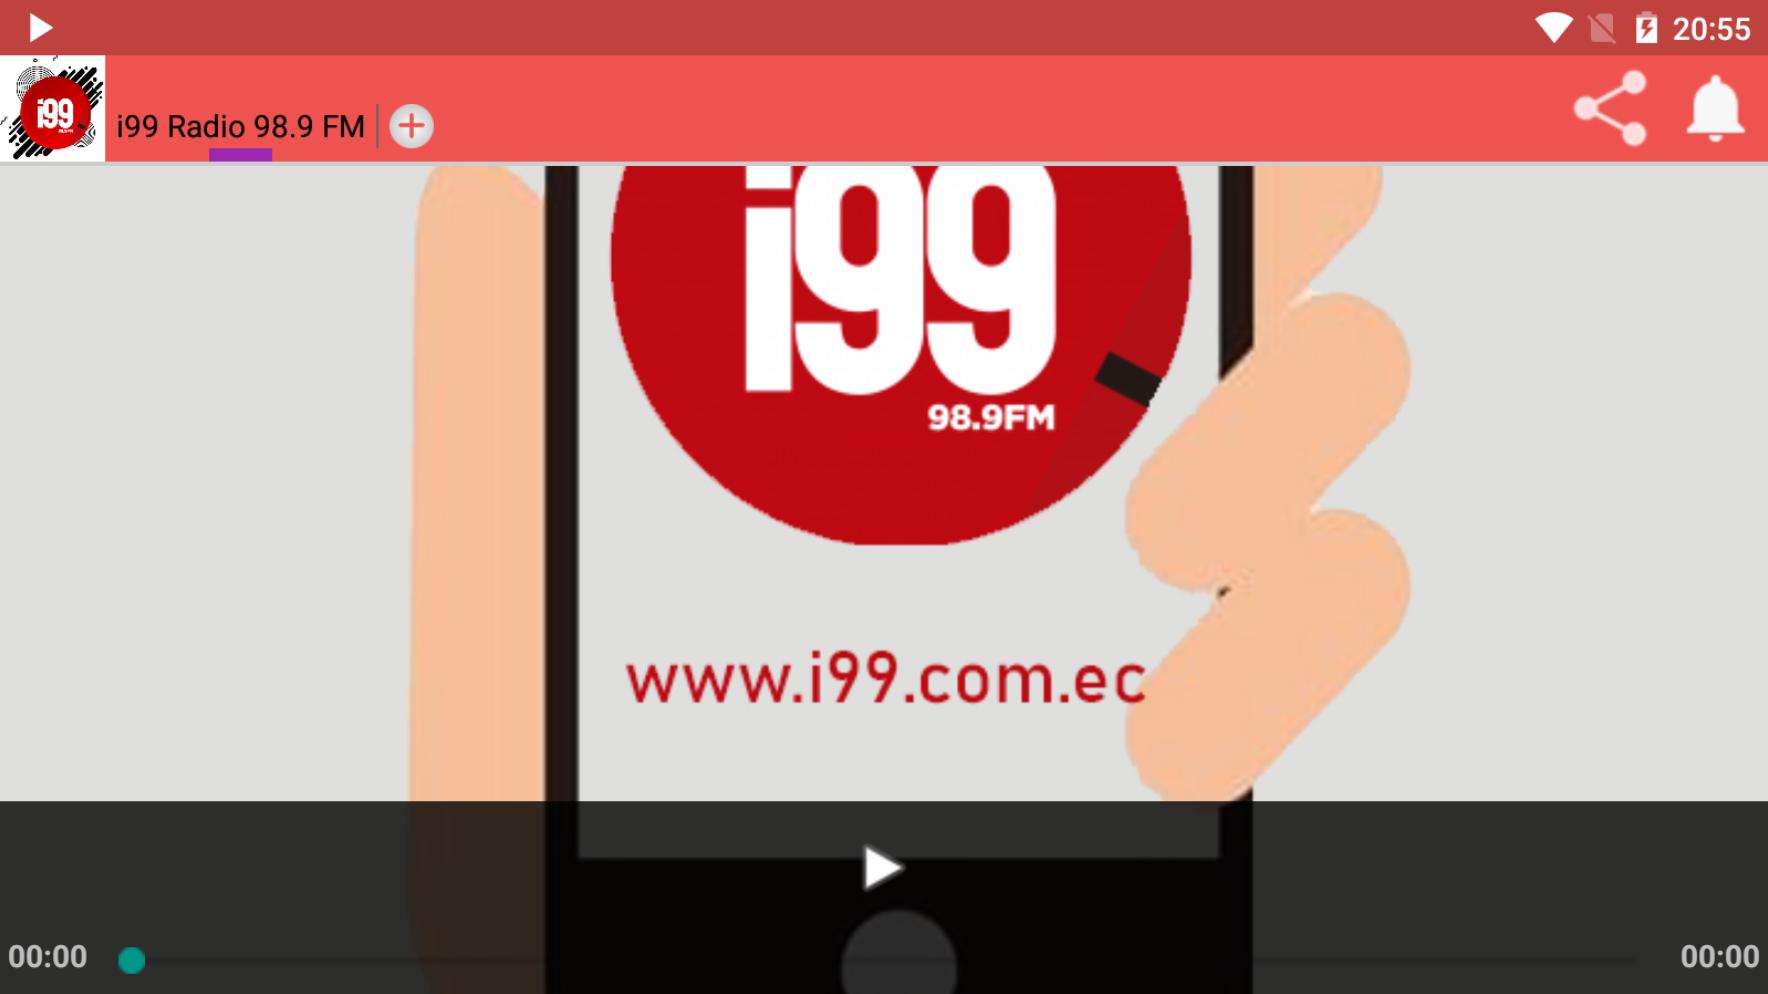 i99 Radio 98.9 FM for Android - APK Download